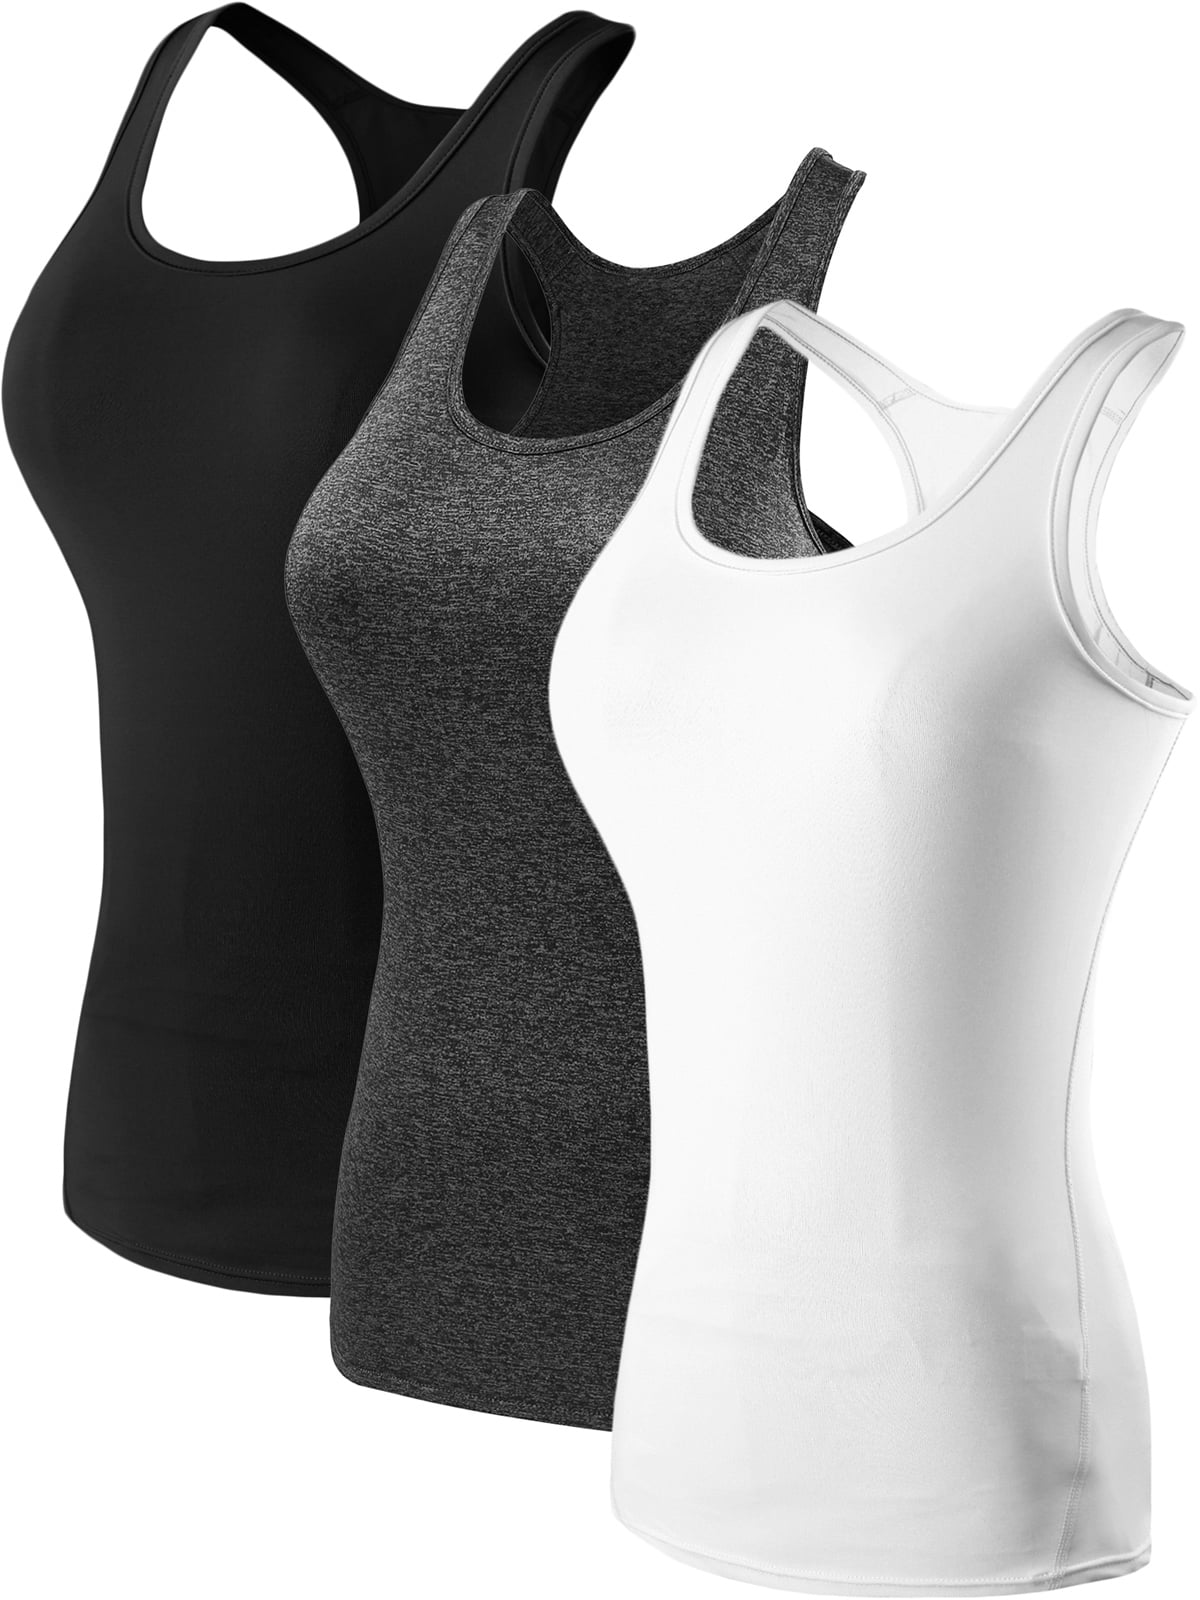 3 NELEUS Size Fit Layer Dry XS Pack,Black+Gray+White,US Compression Womens Base Tank Top